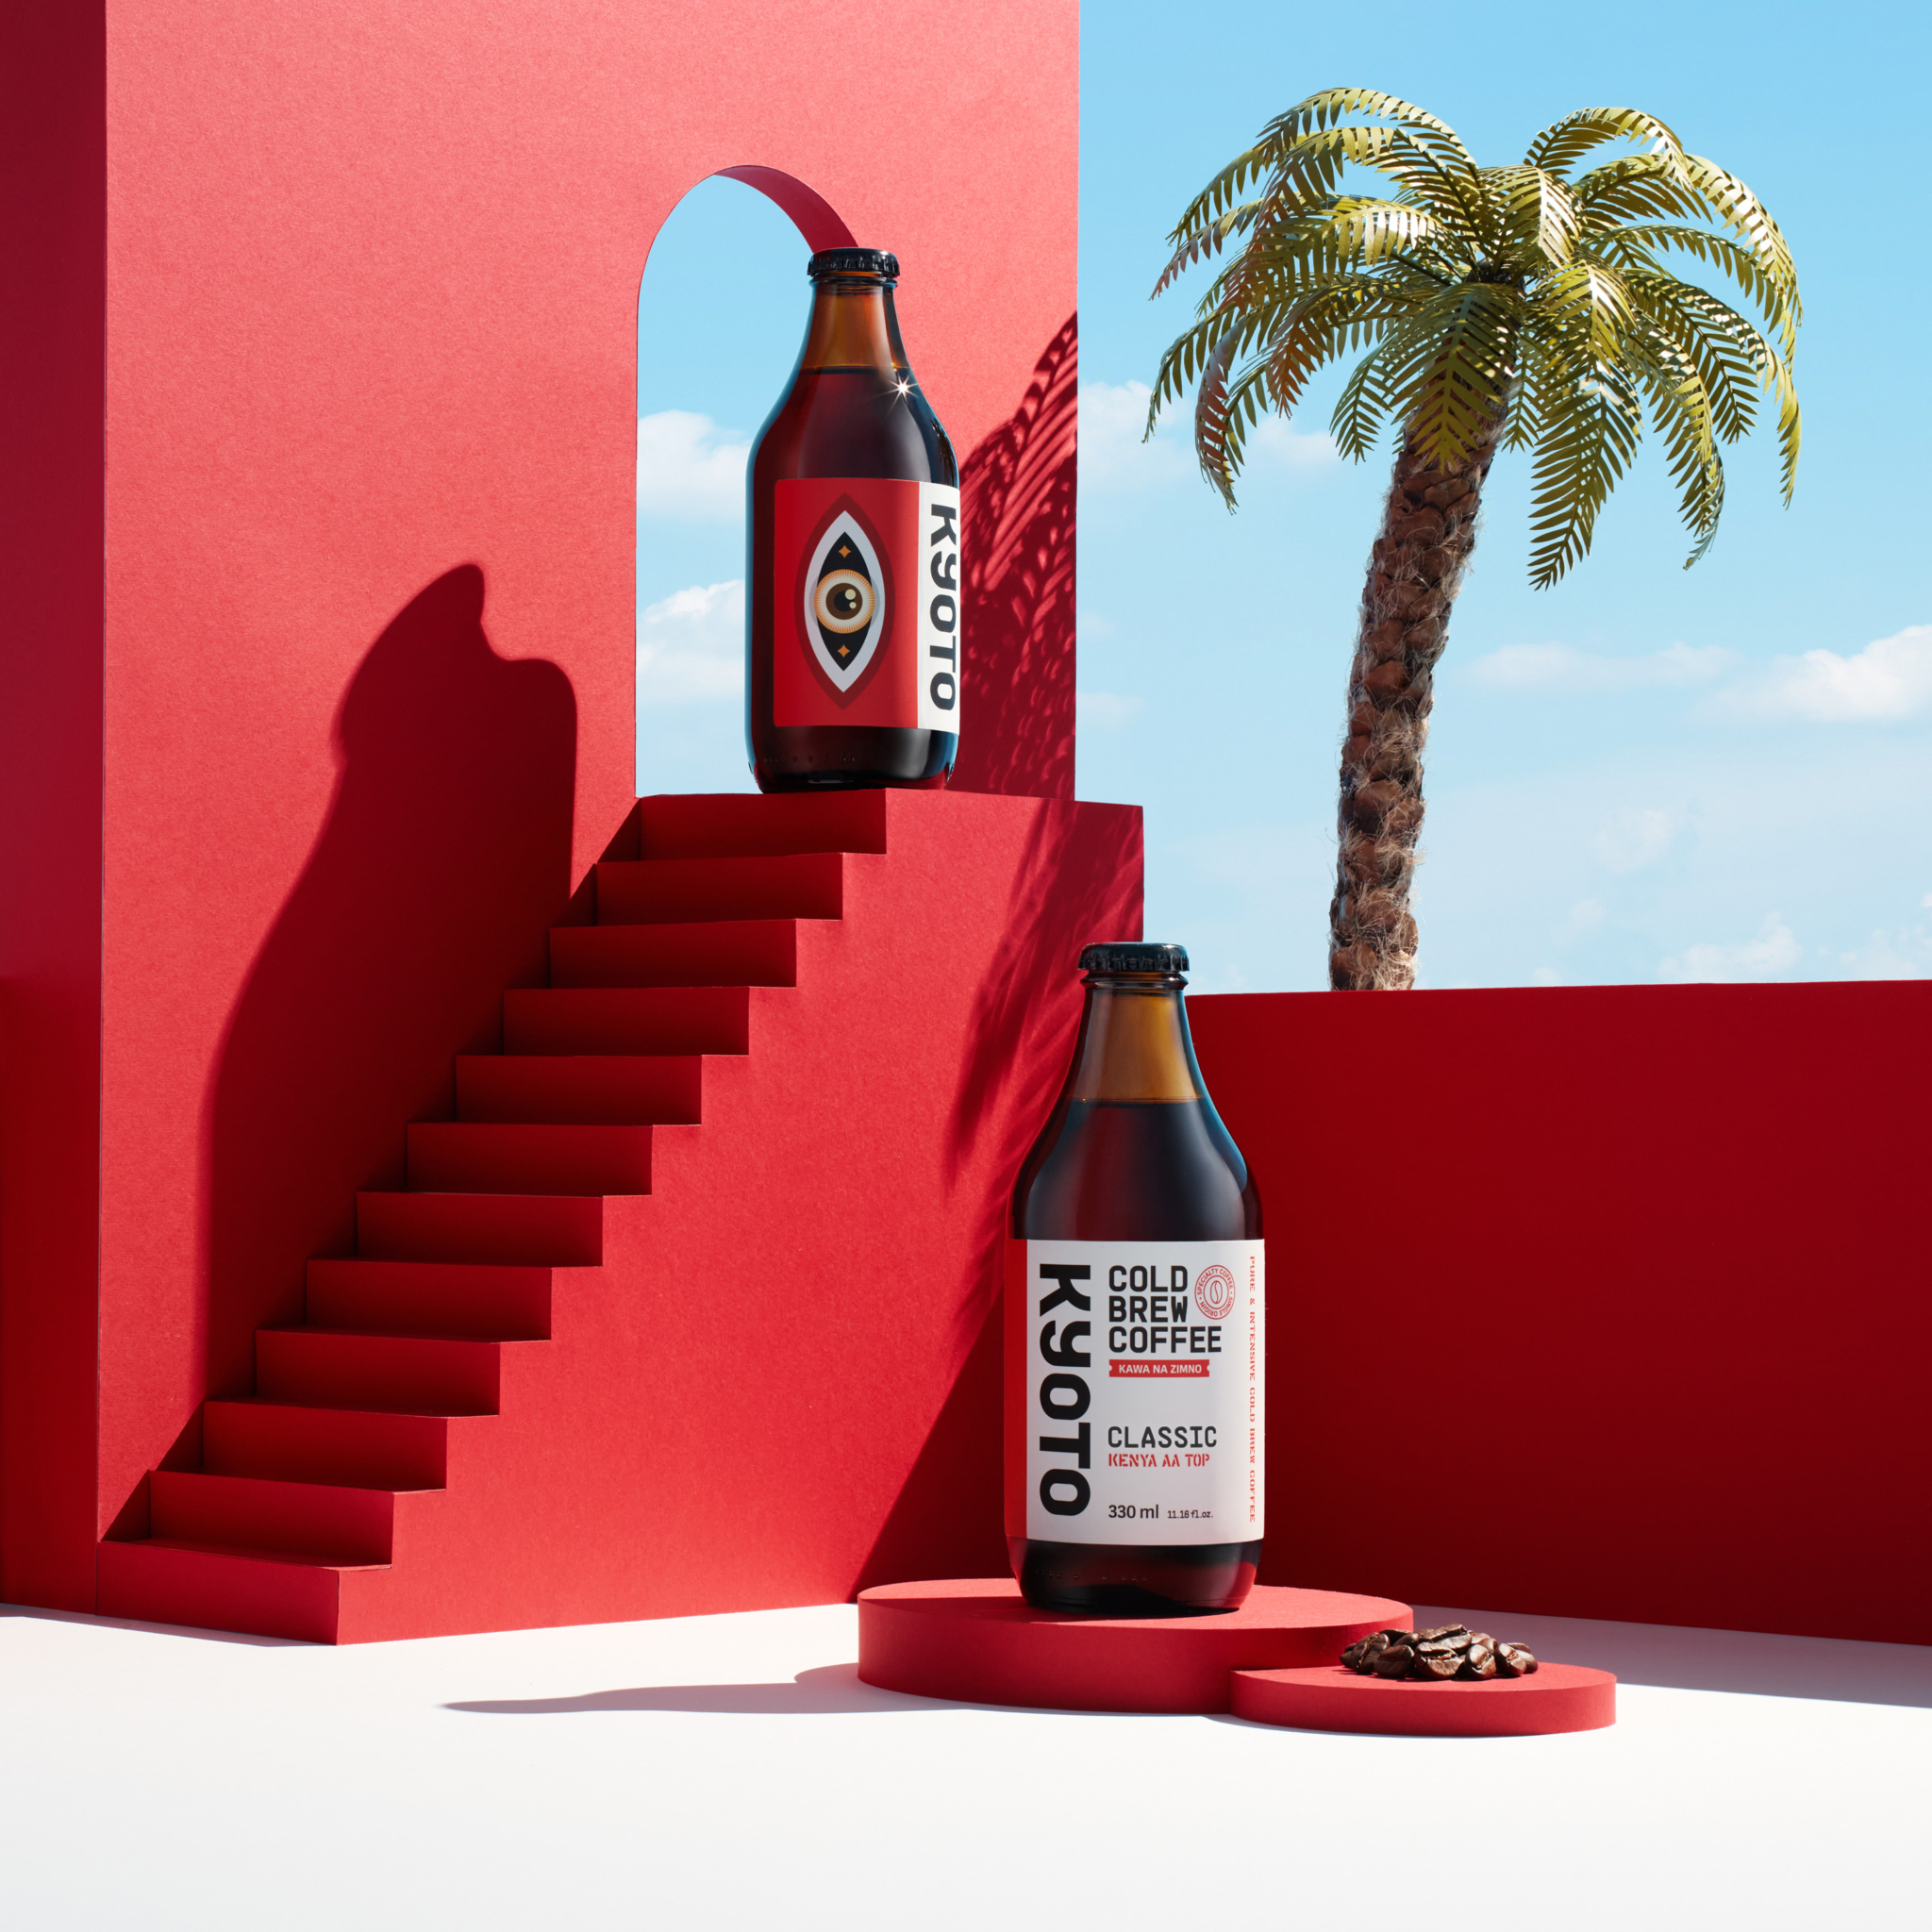 Cold Brew Coffee in a bottle on a red background with sky